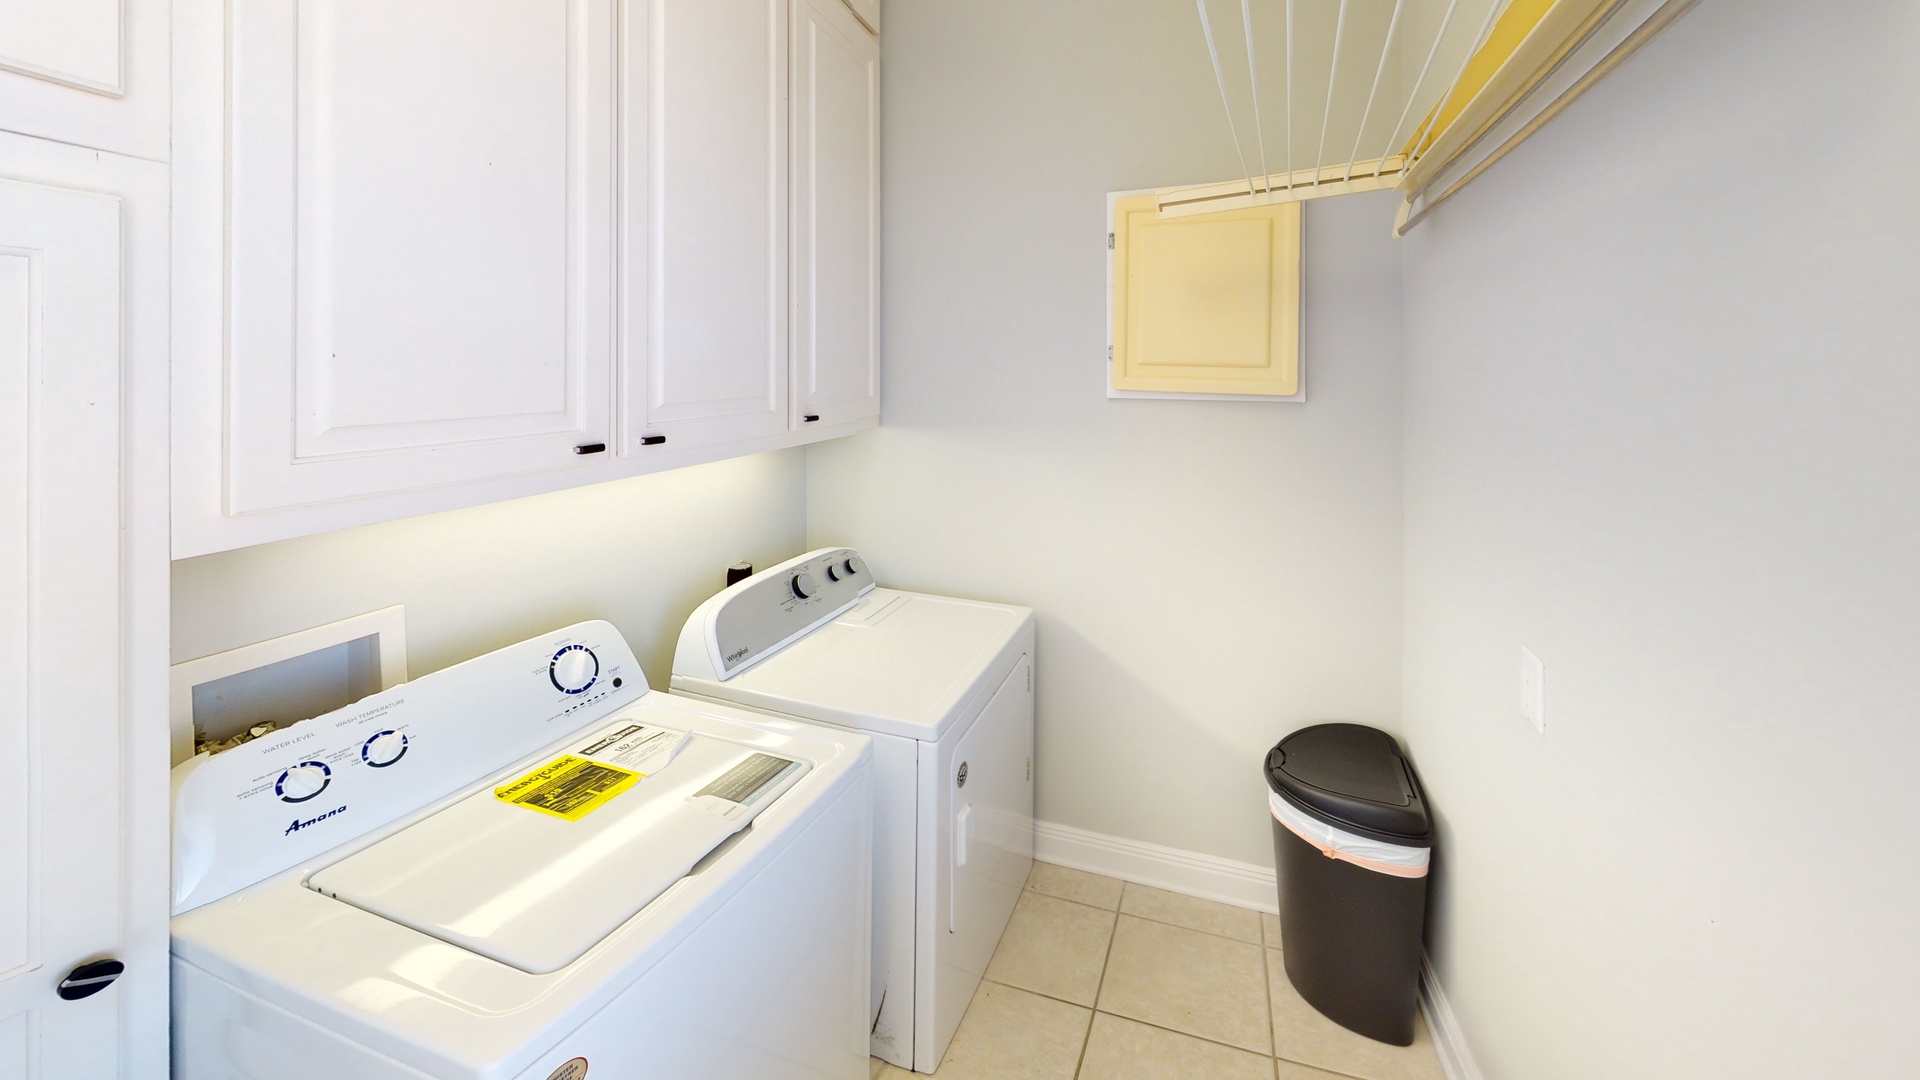 Large laundry room with full size washer and dryer